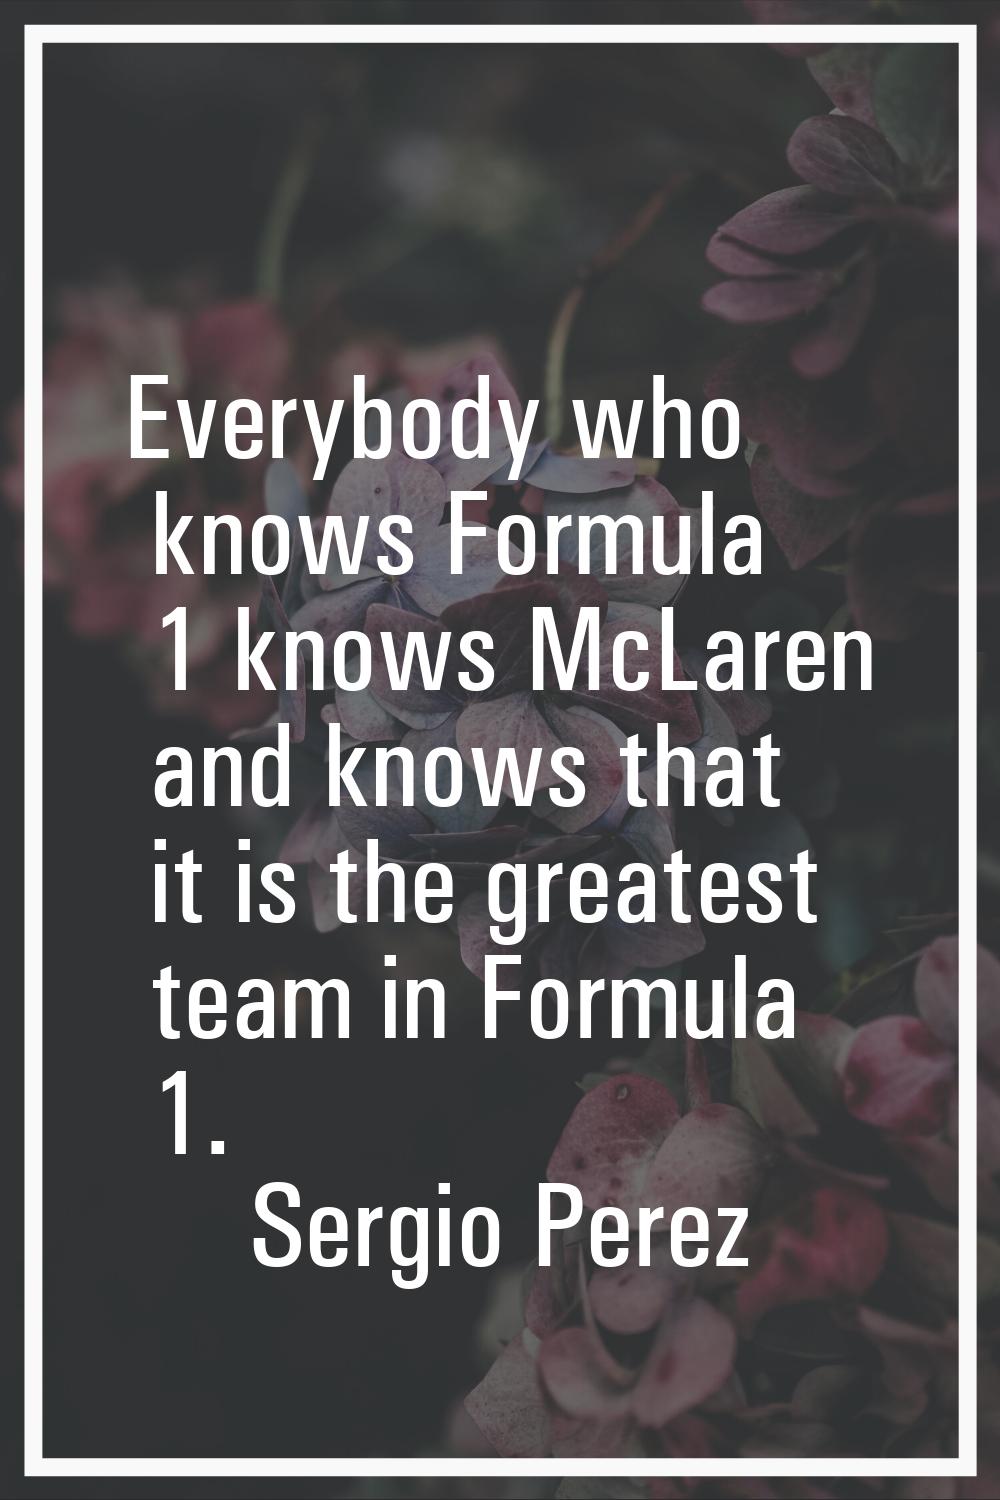 Everybody who knows Formula 1 knows McLaren and knows that it is the greatest team in Formula 1.